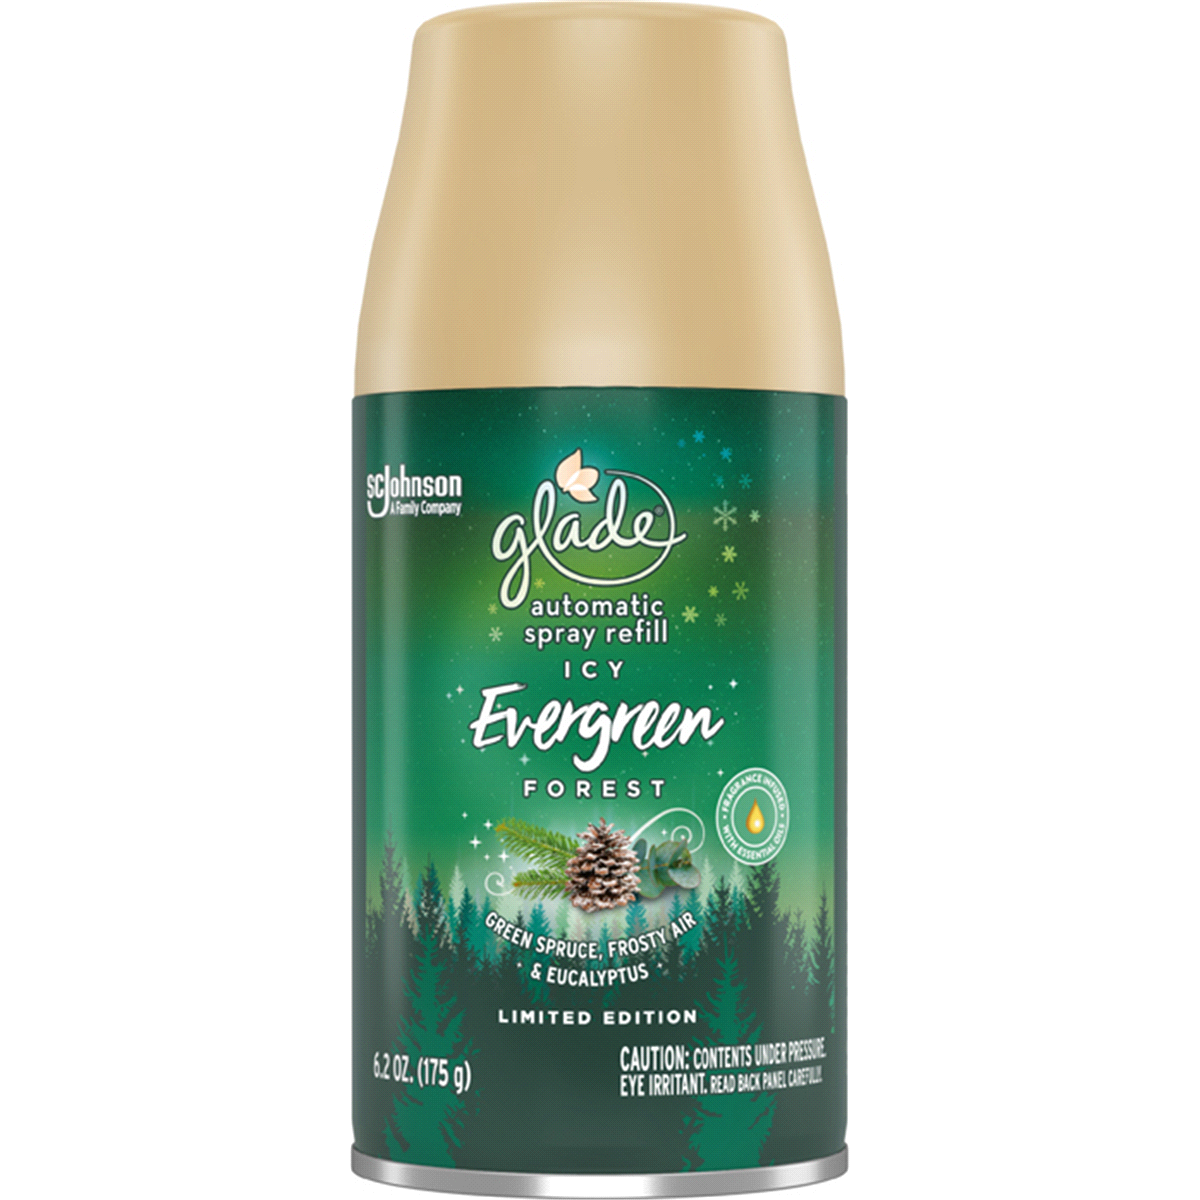 slide 1 of 1, Glade Limited Edition Icy Evergreen Forest Automatic Spray Refill, 6.2 oz